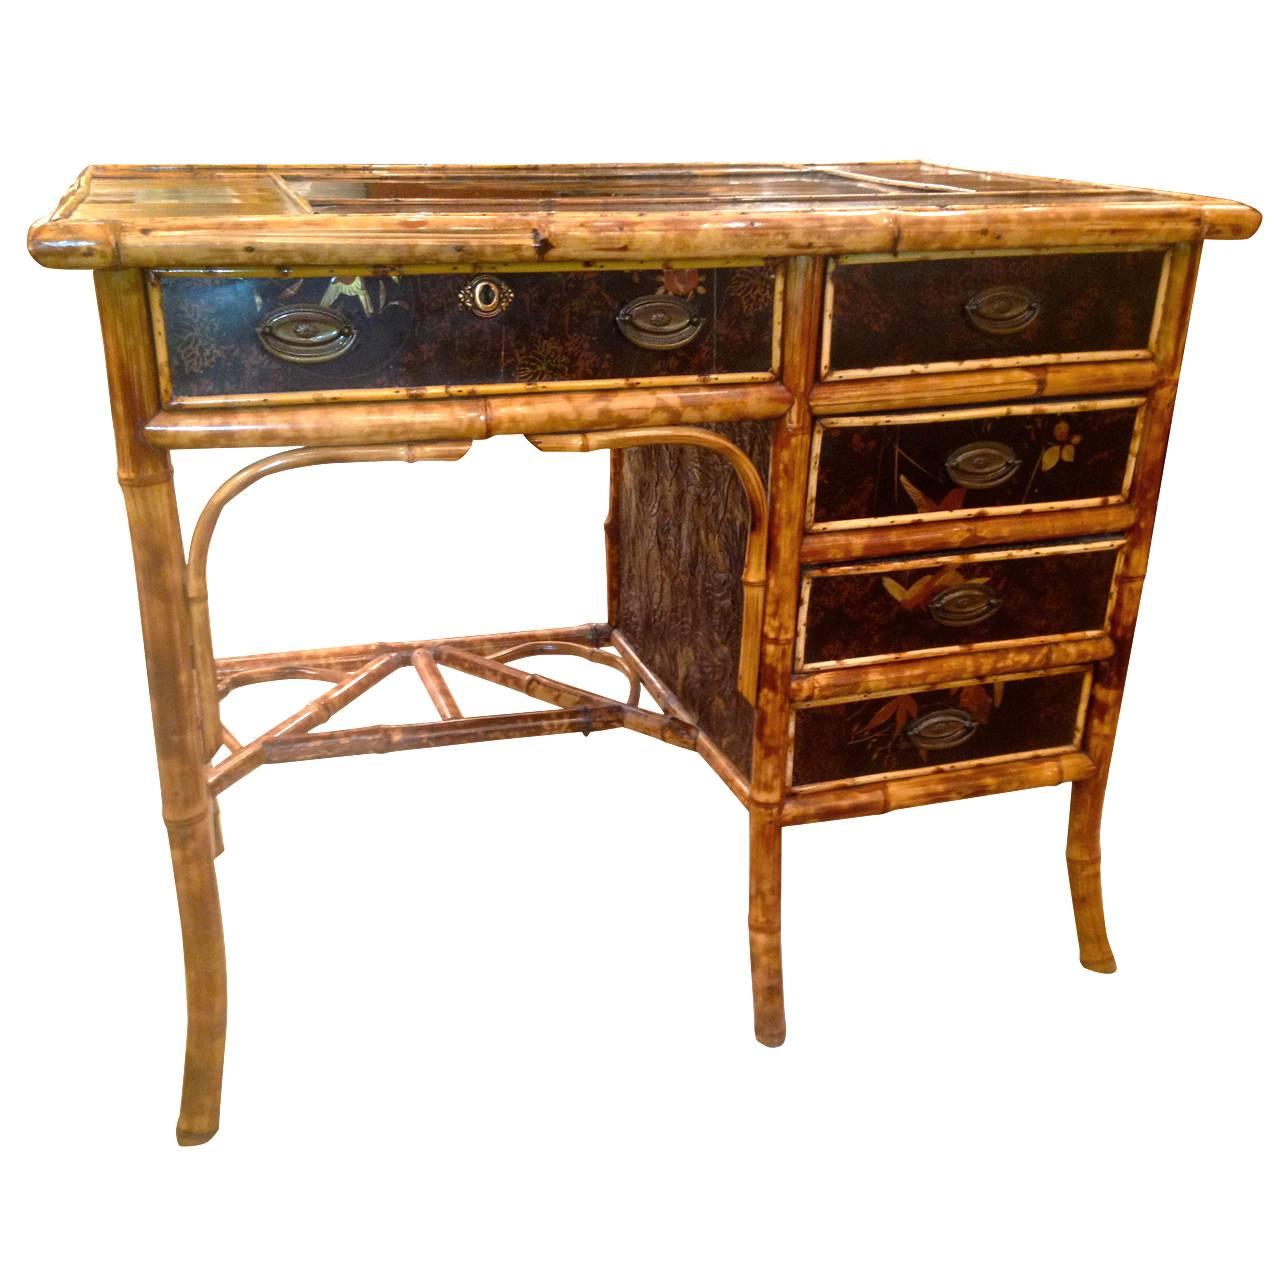 19th Century English Bamboo Chinoiserie Lacquered Desk